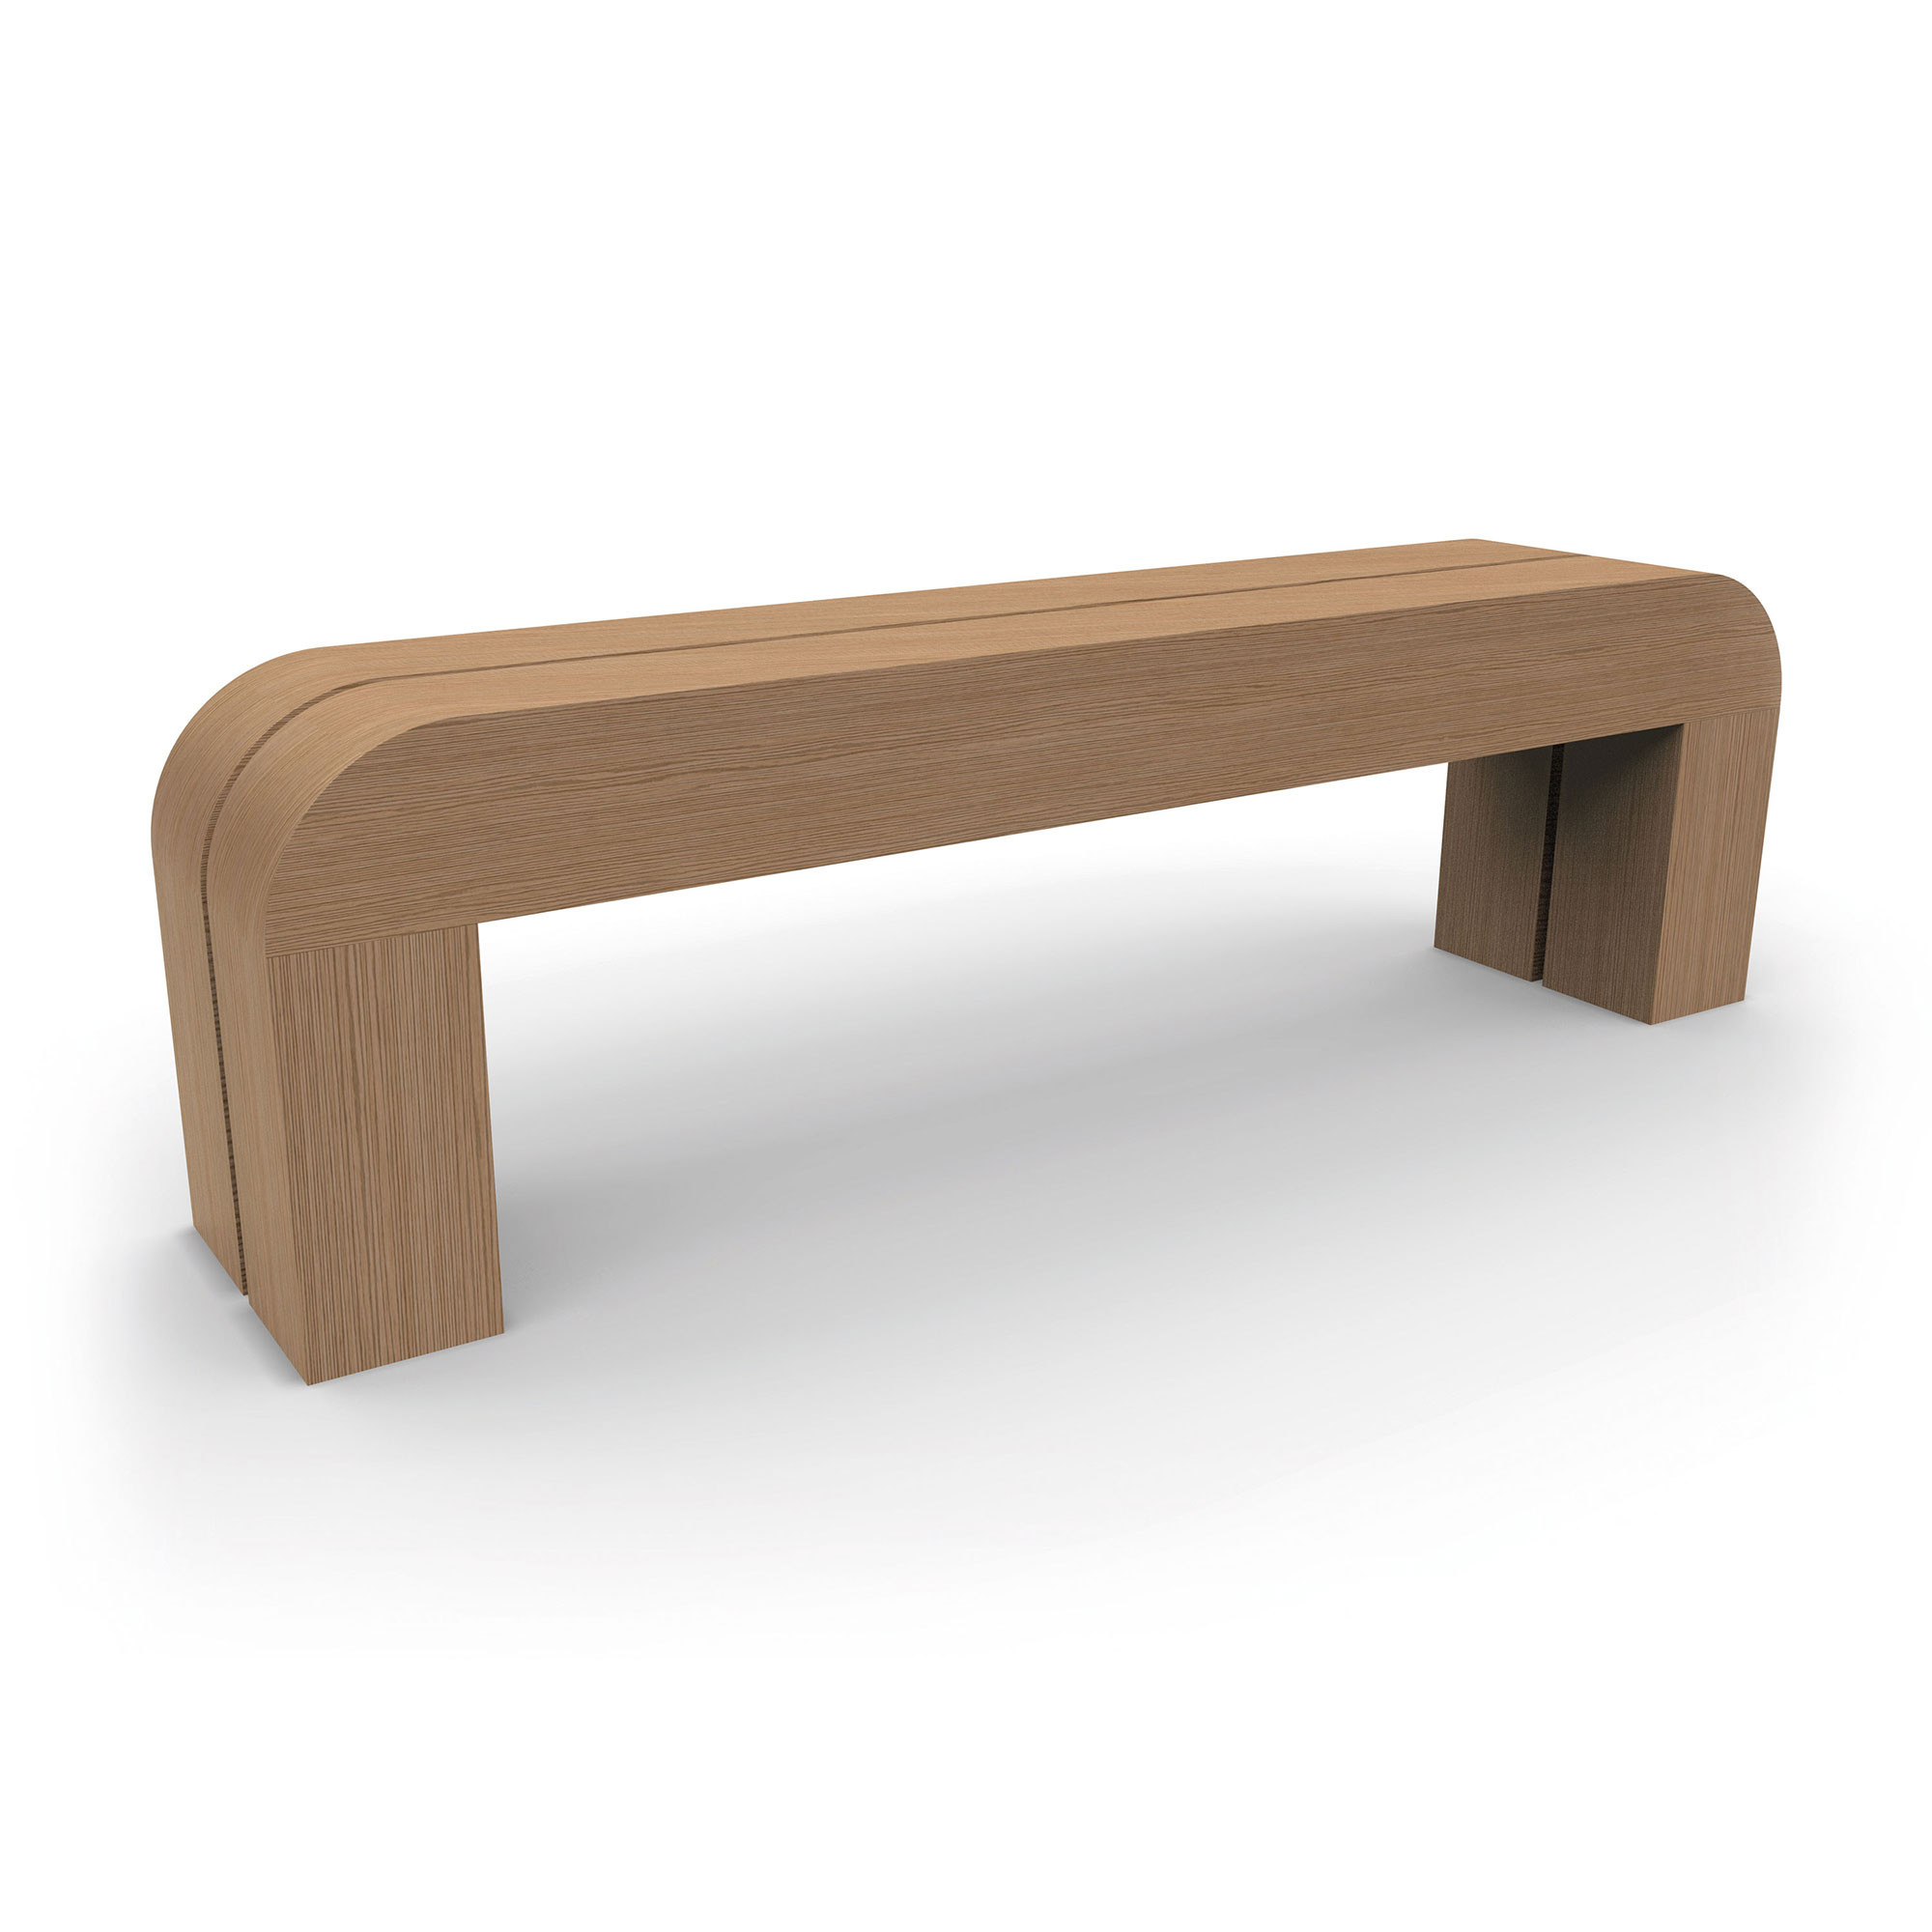 Type 9 Backless Bench